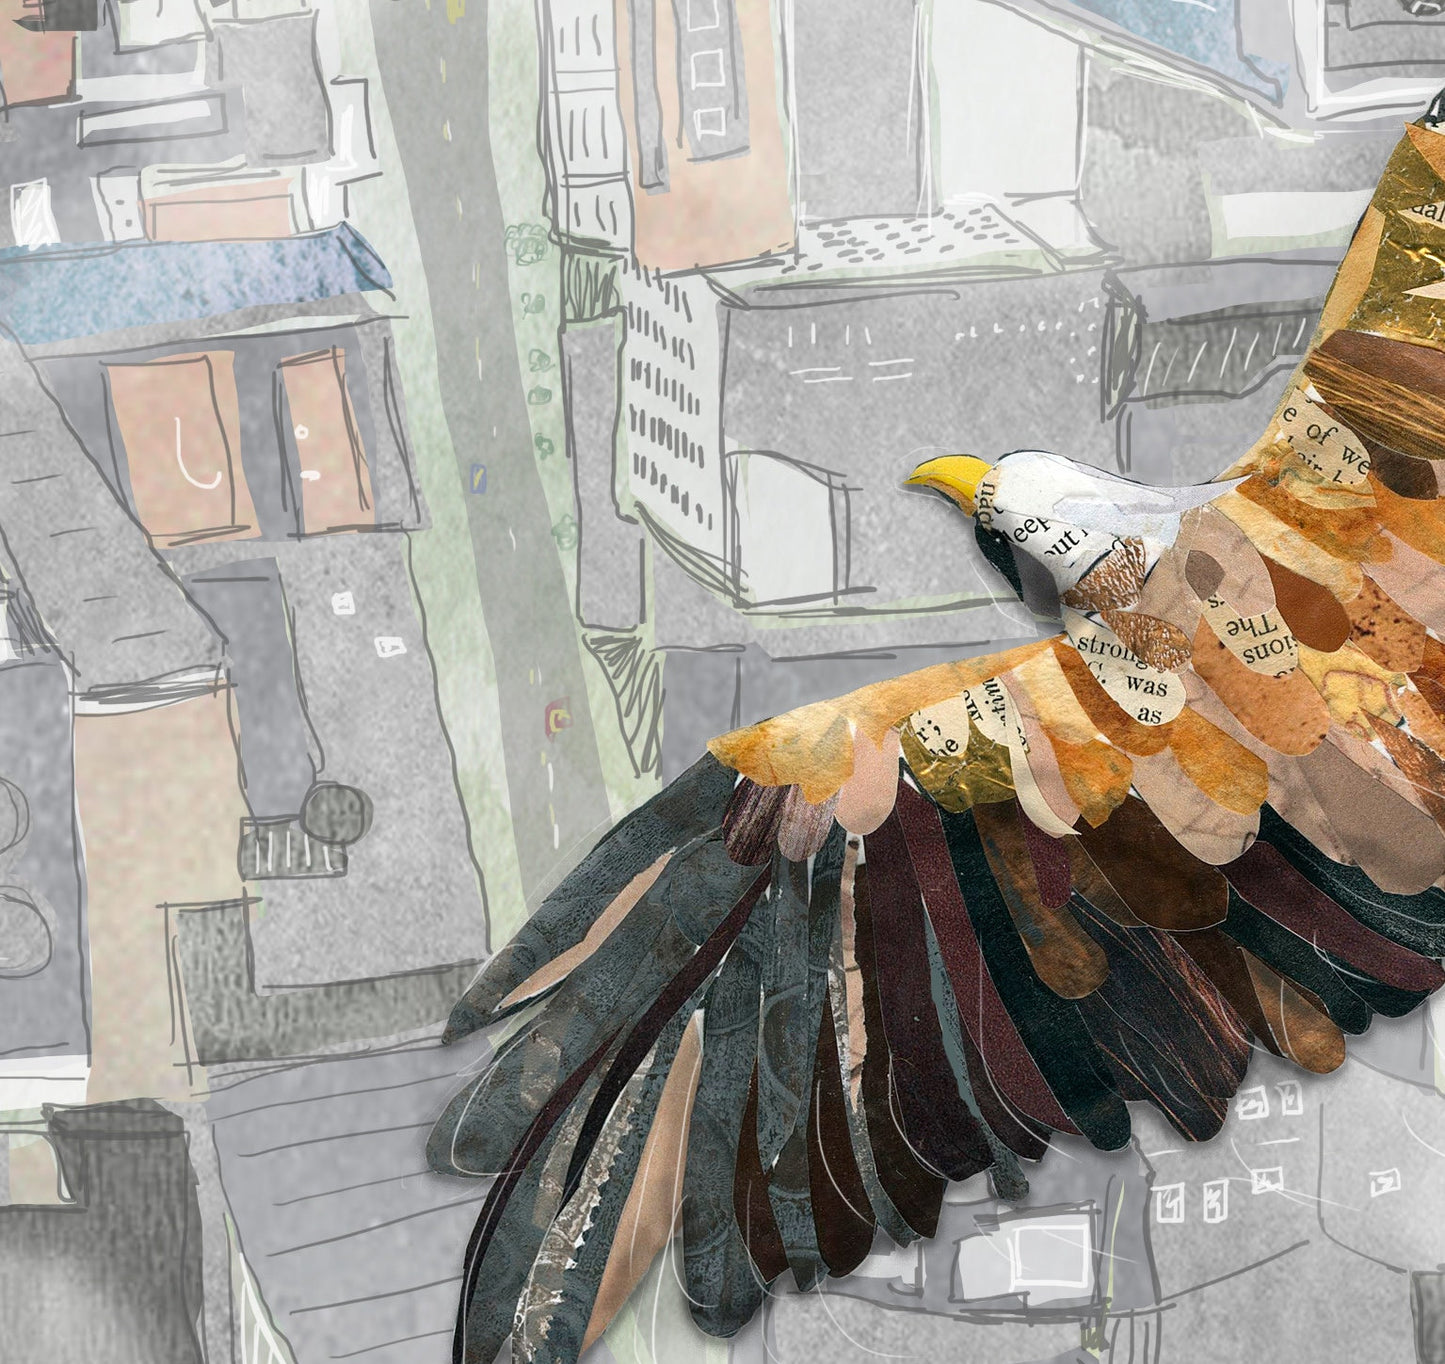 Greeting Card of mixed media collage of a Bald Eagle flying over a city, migration, birds, from above - Blank Inside